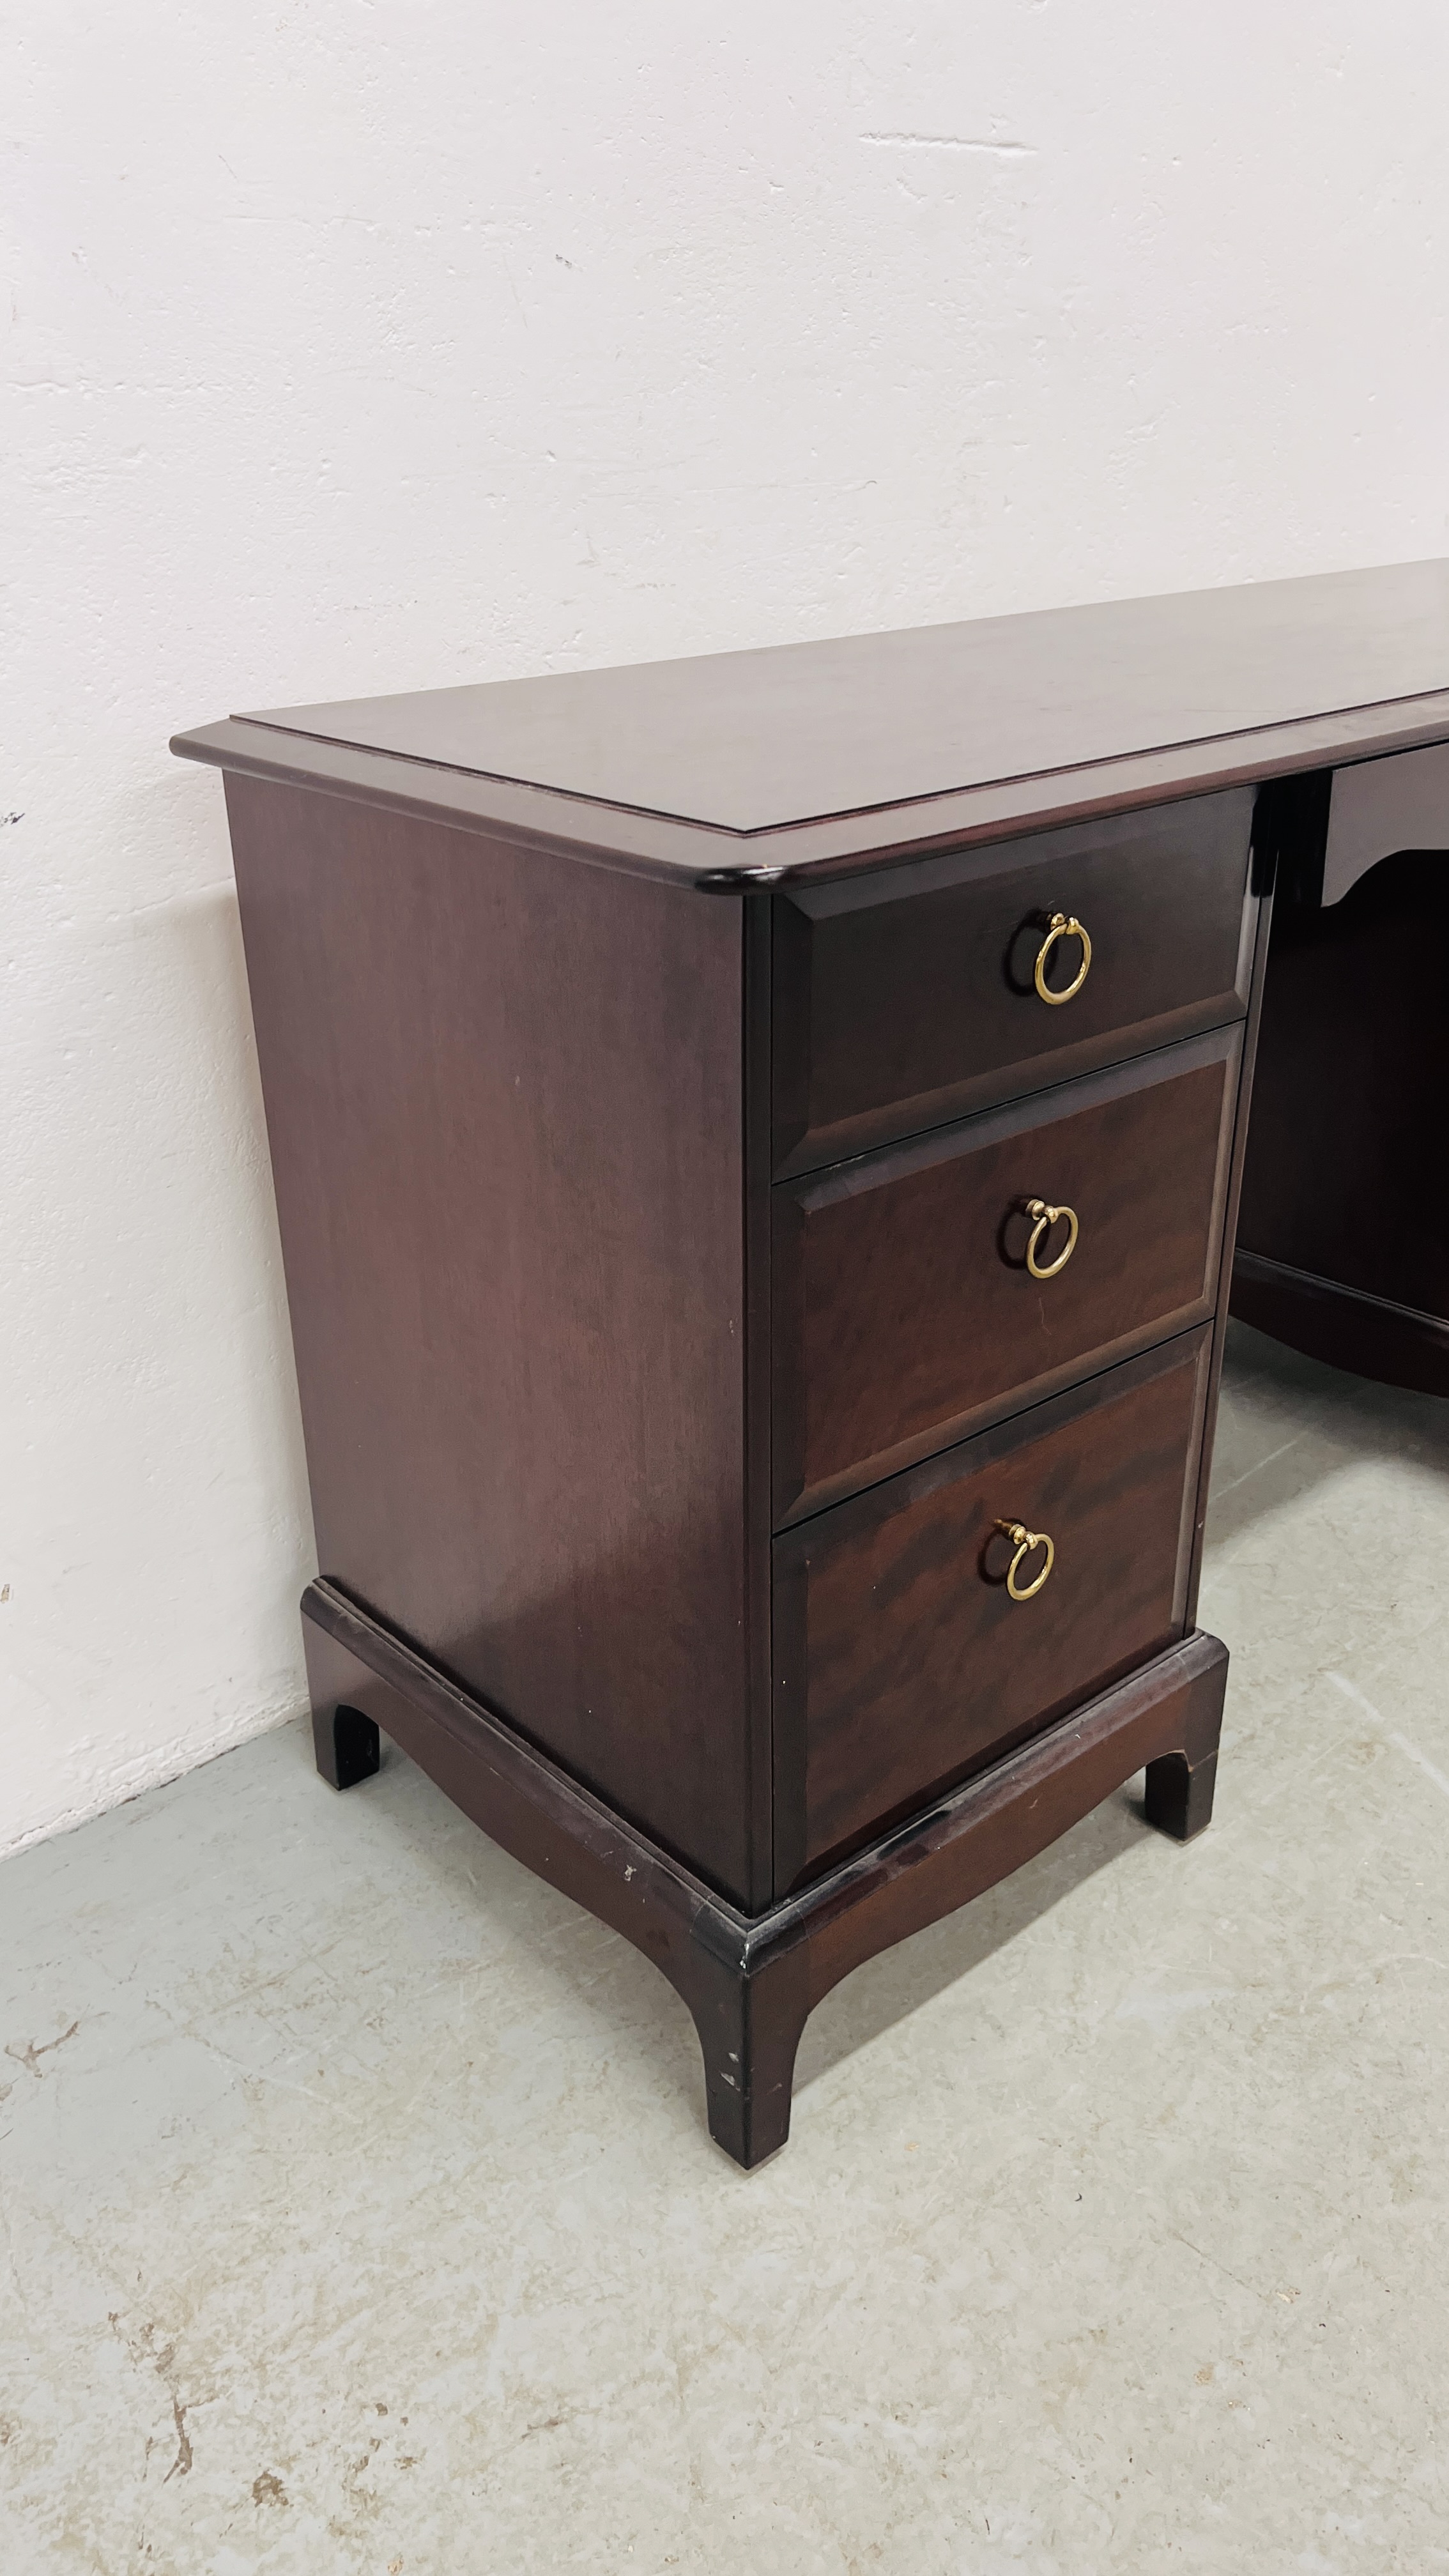 STAG SEVEN DRAWER DRESSING TABLE WIDTH 135CM. DEPTH 46CM. HEIGHT 71CM. - Image 3 of 9